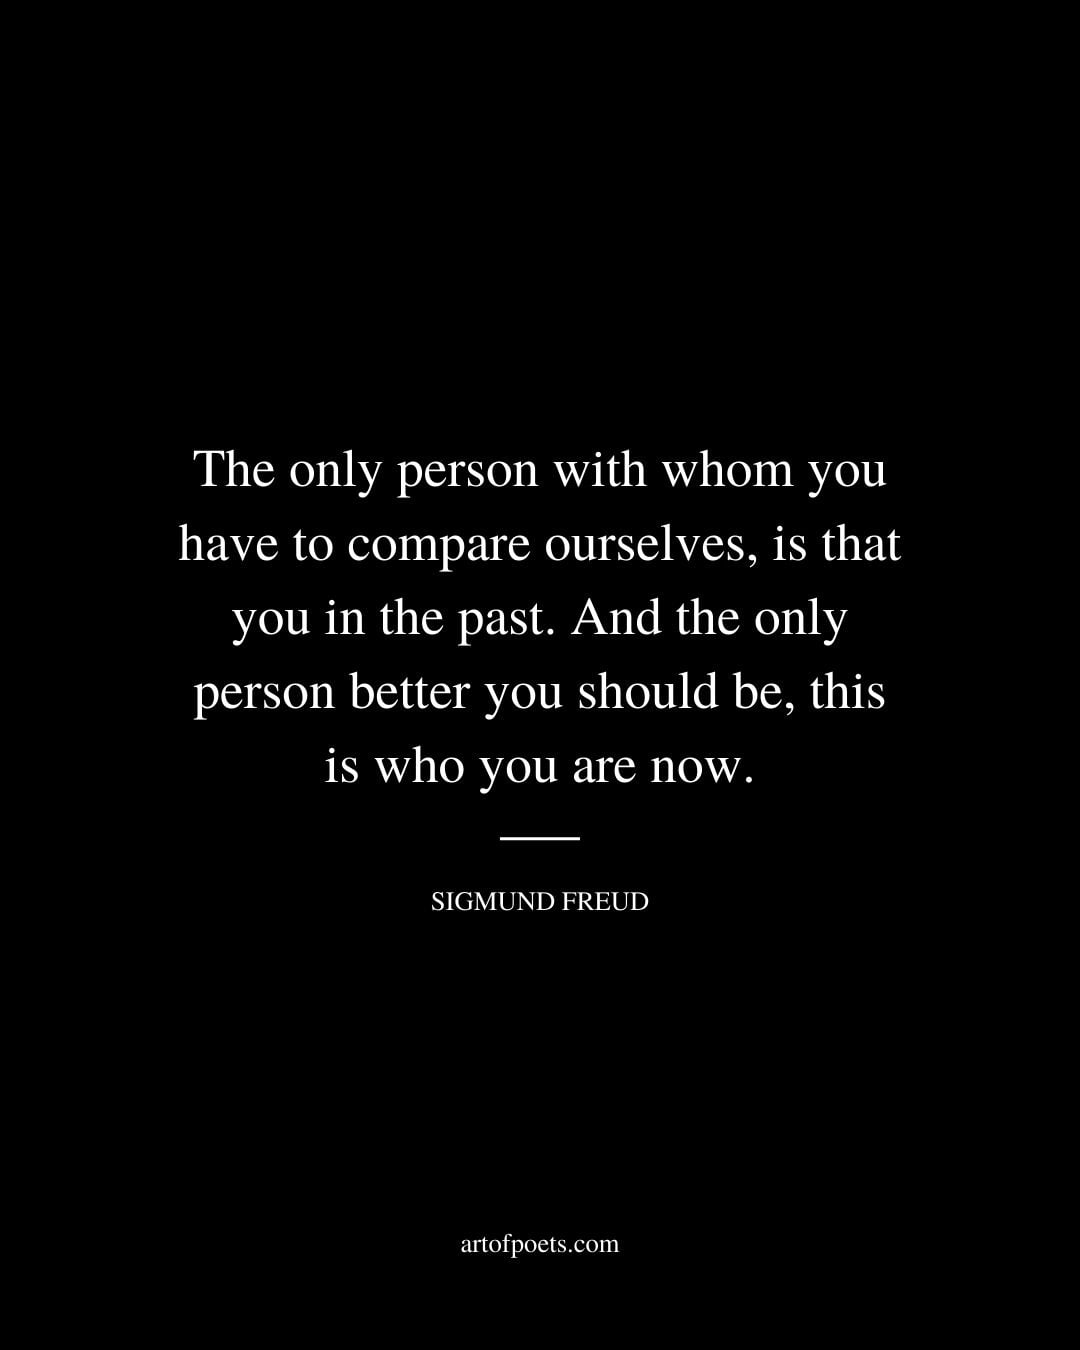 The only person with whom you have to compare ourselves is that you in the past. And the only person better you should be this is who you are now